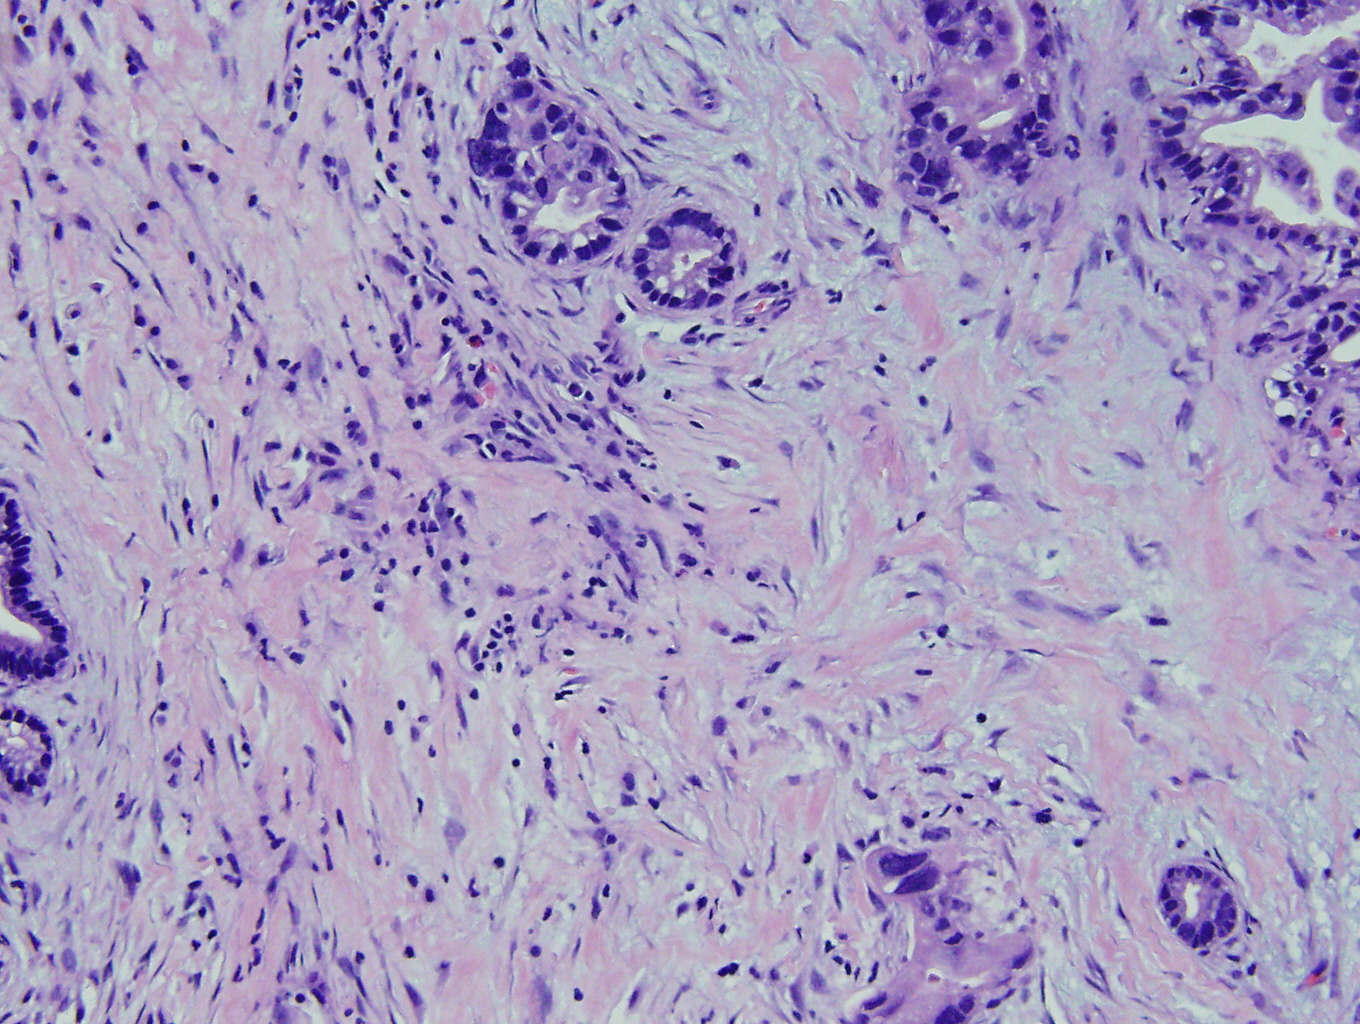 Case of the Month, Mar. 2013: Figure 3